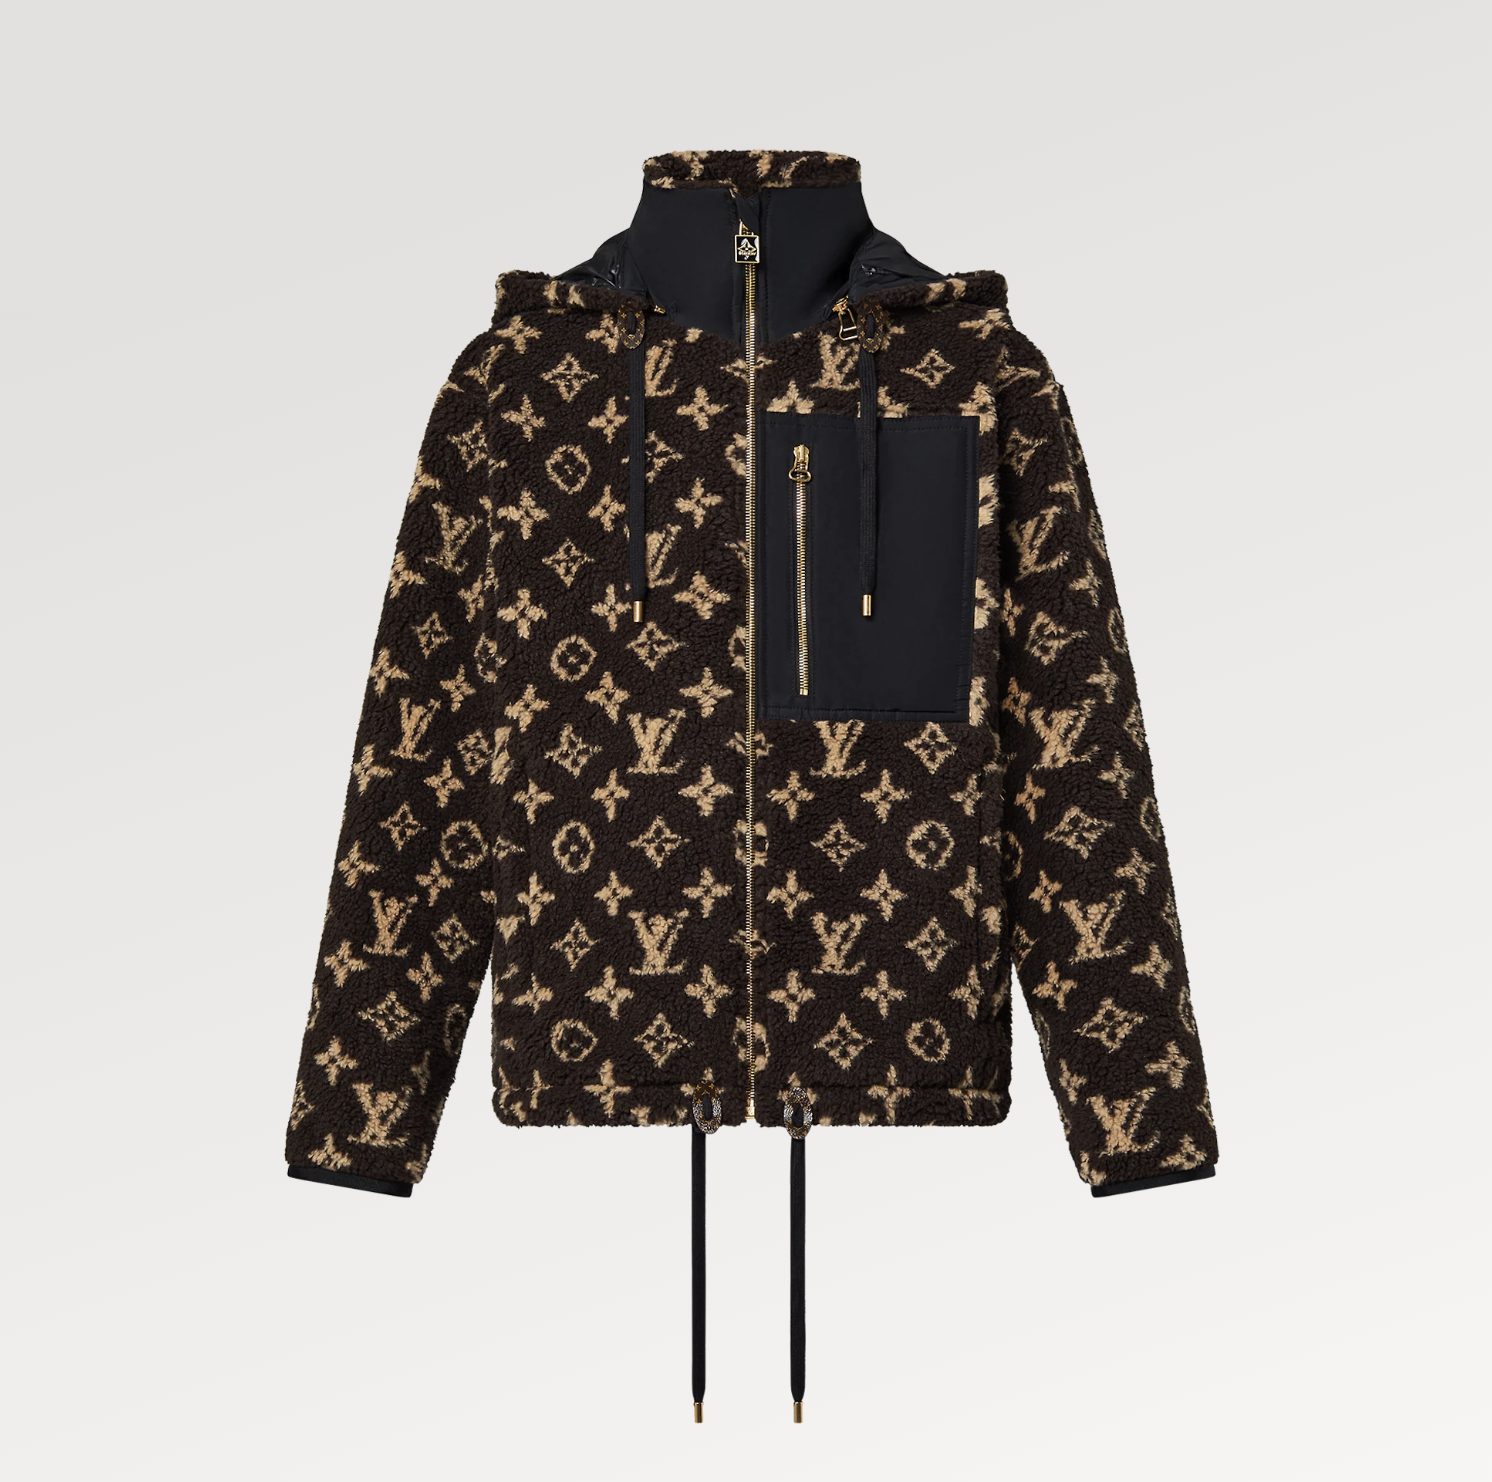 Louis Vuitton jacket - MADELYN